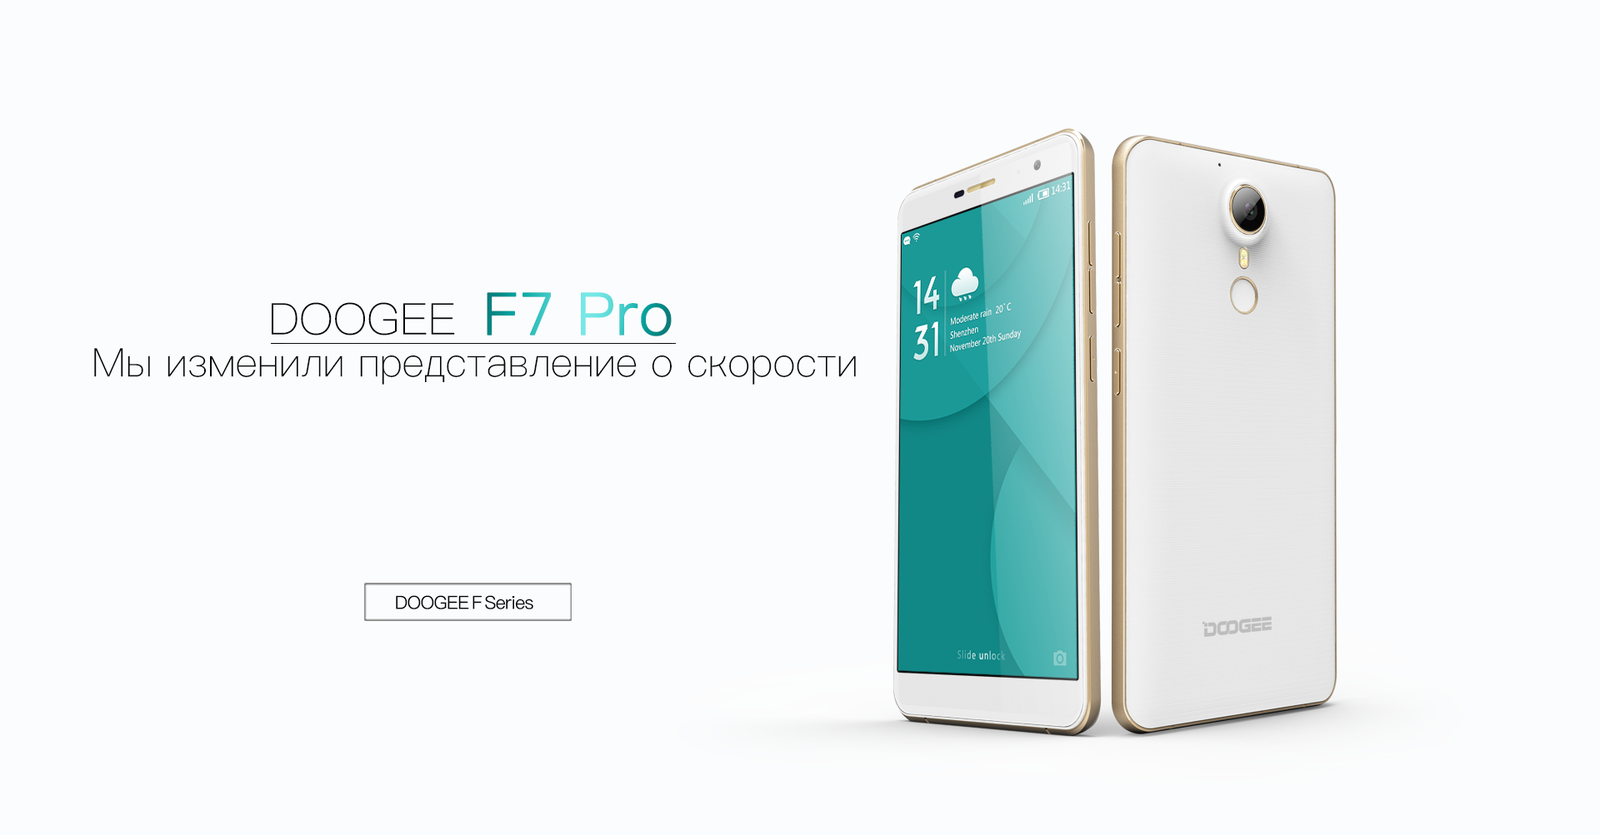 Ten-core Doogee F7 Pro officially went on sale - Chinese phone, China, Longpost, My, Doogee, , Smartphone